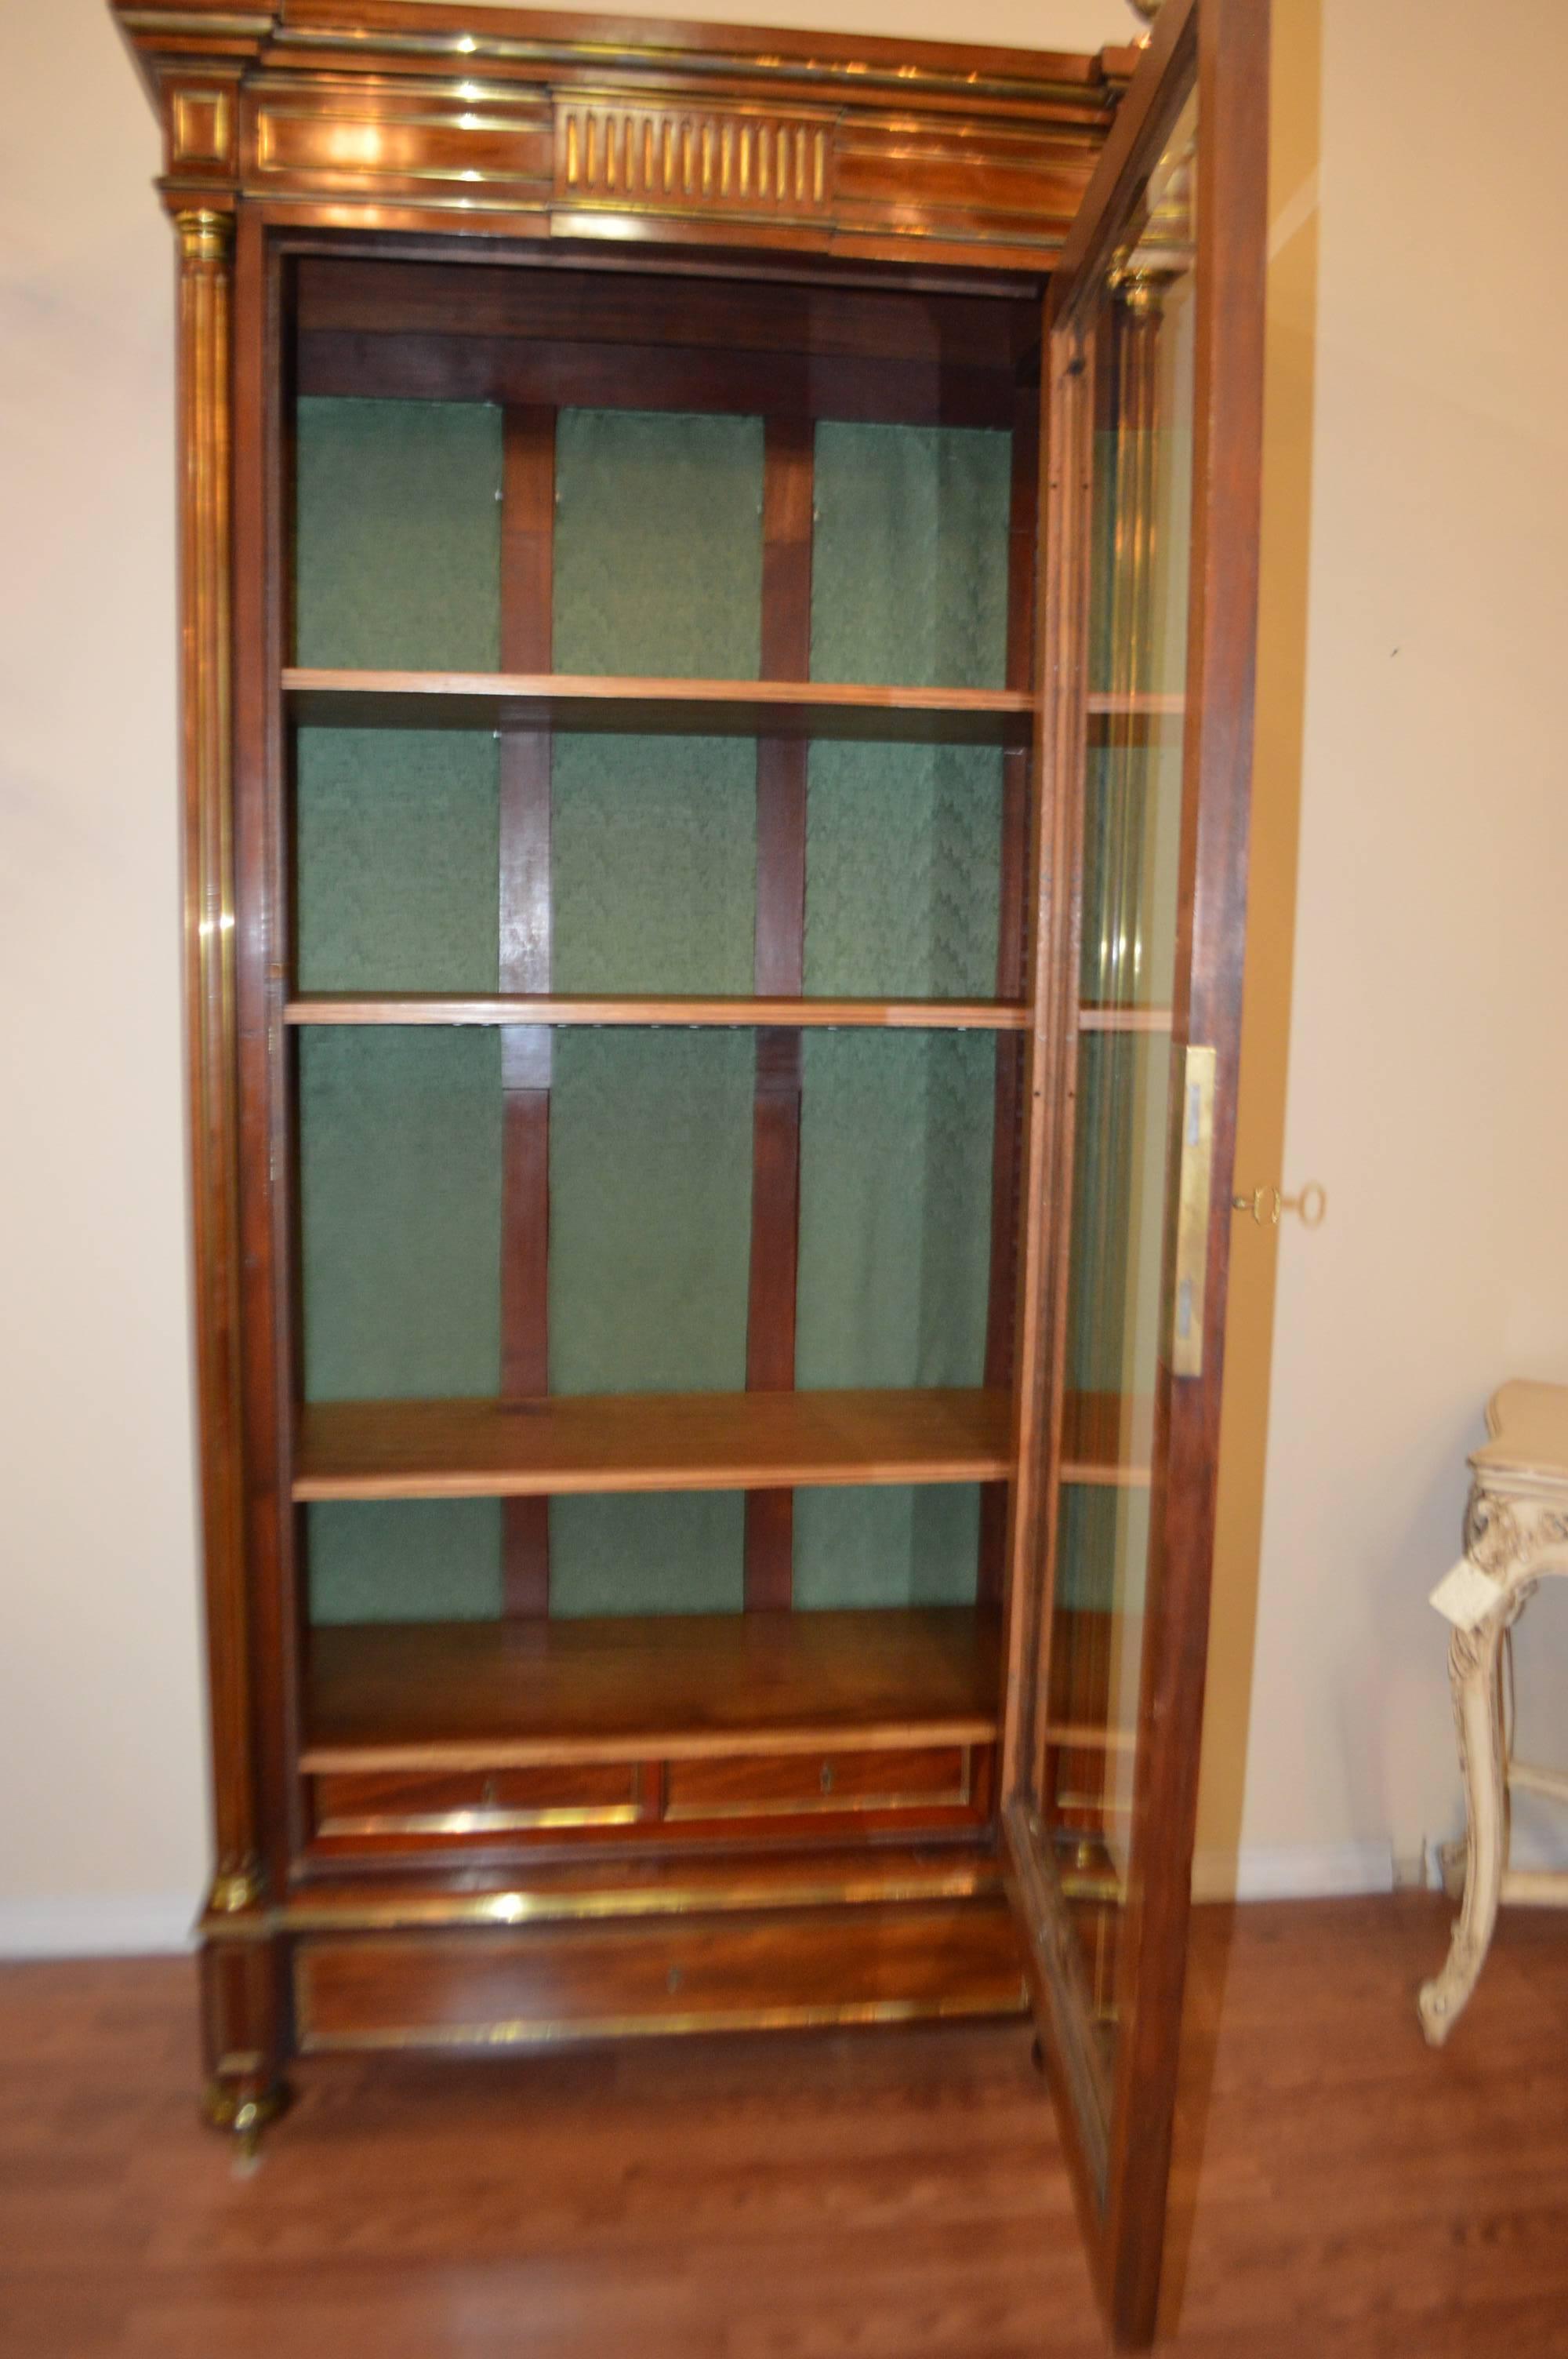 19th century Directoire style and fine quality mahogany bookcase with bronze molding. Unusual large bronze finials adorned the top of the bookcase.
The bookcase has also two drawers inside below the lower shelf and one outside. The glass door is